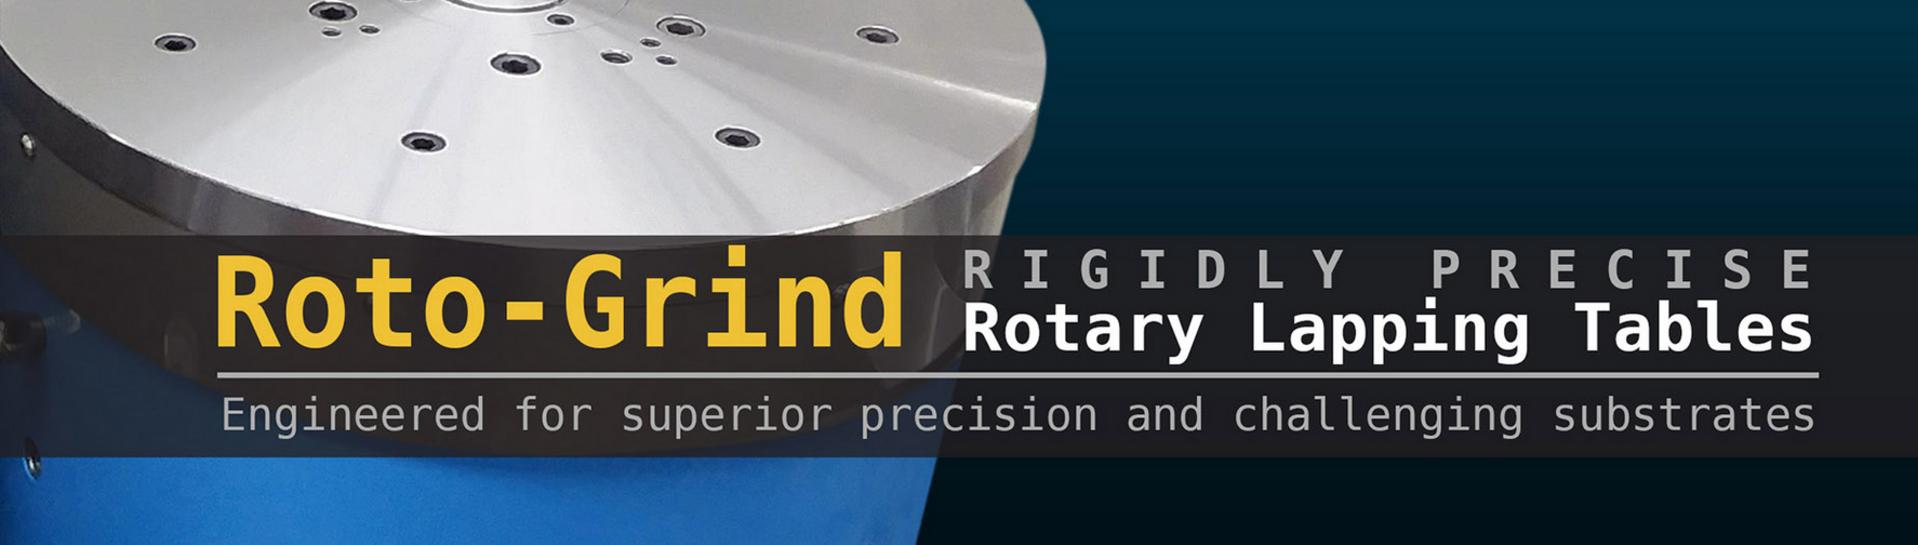 Banner graphic for Roto Tech representing ceramic rotary grinding